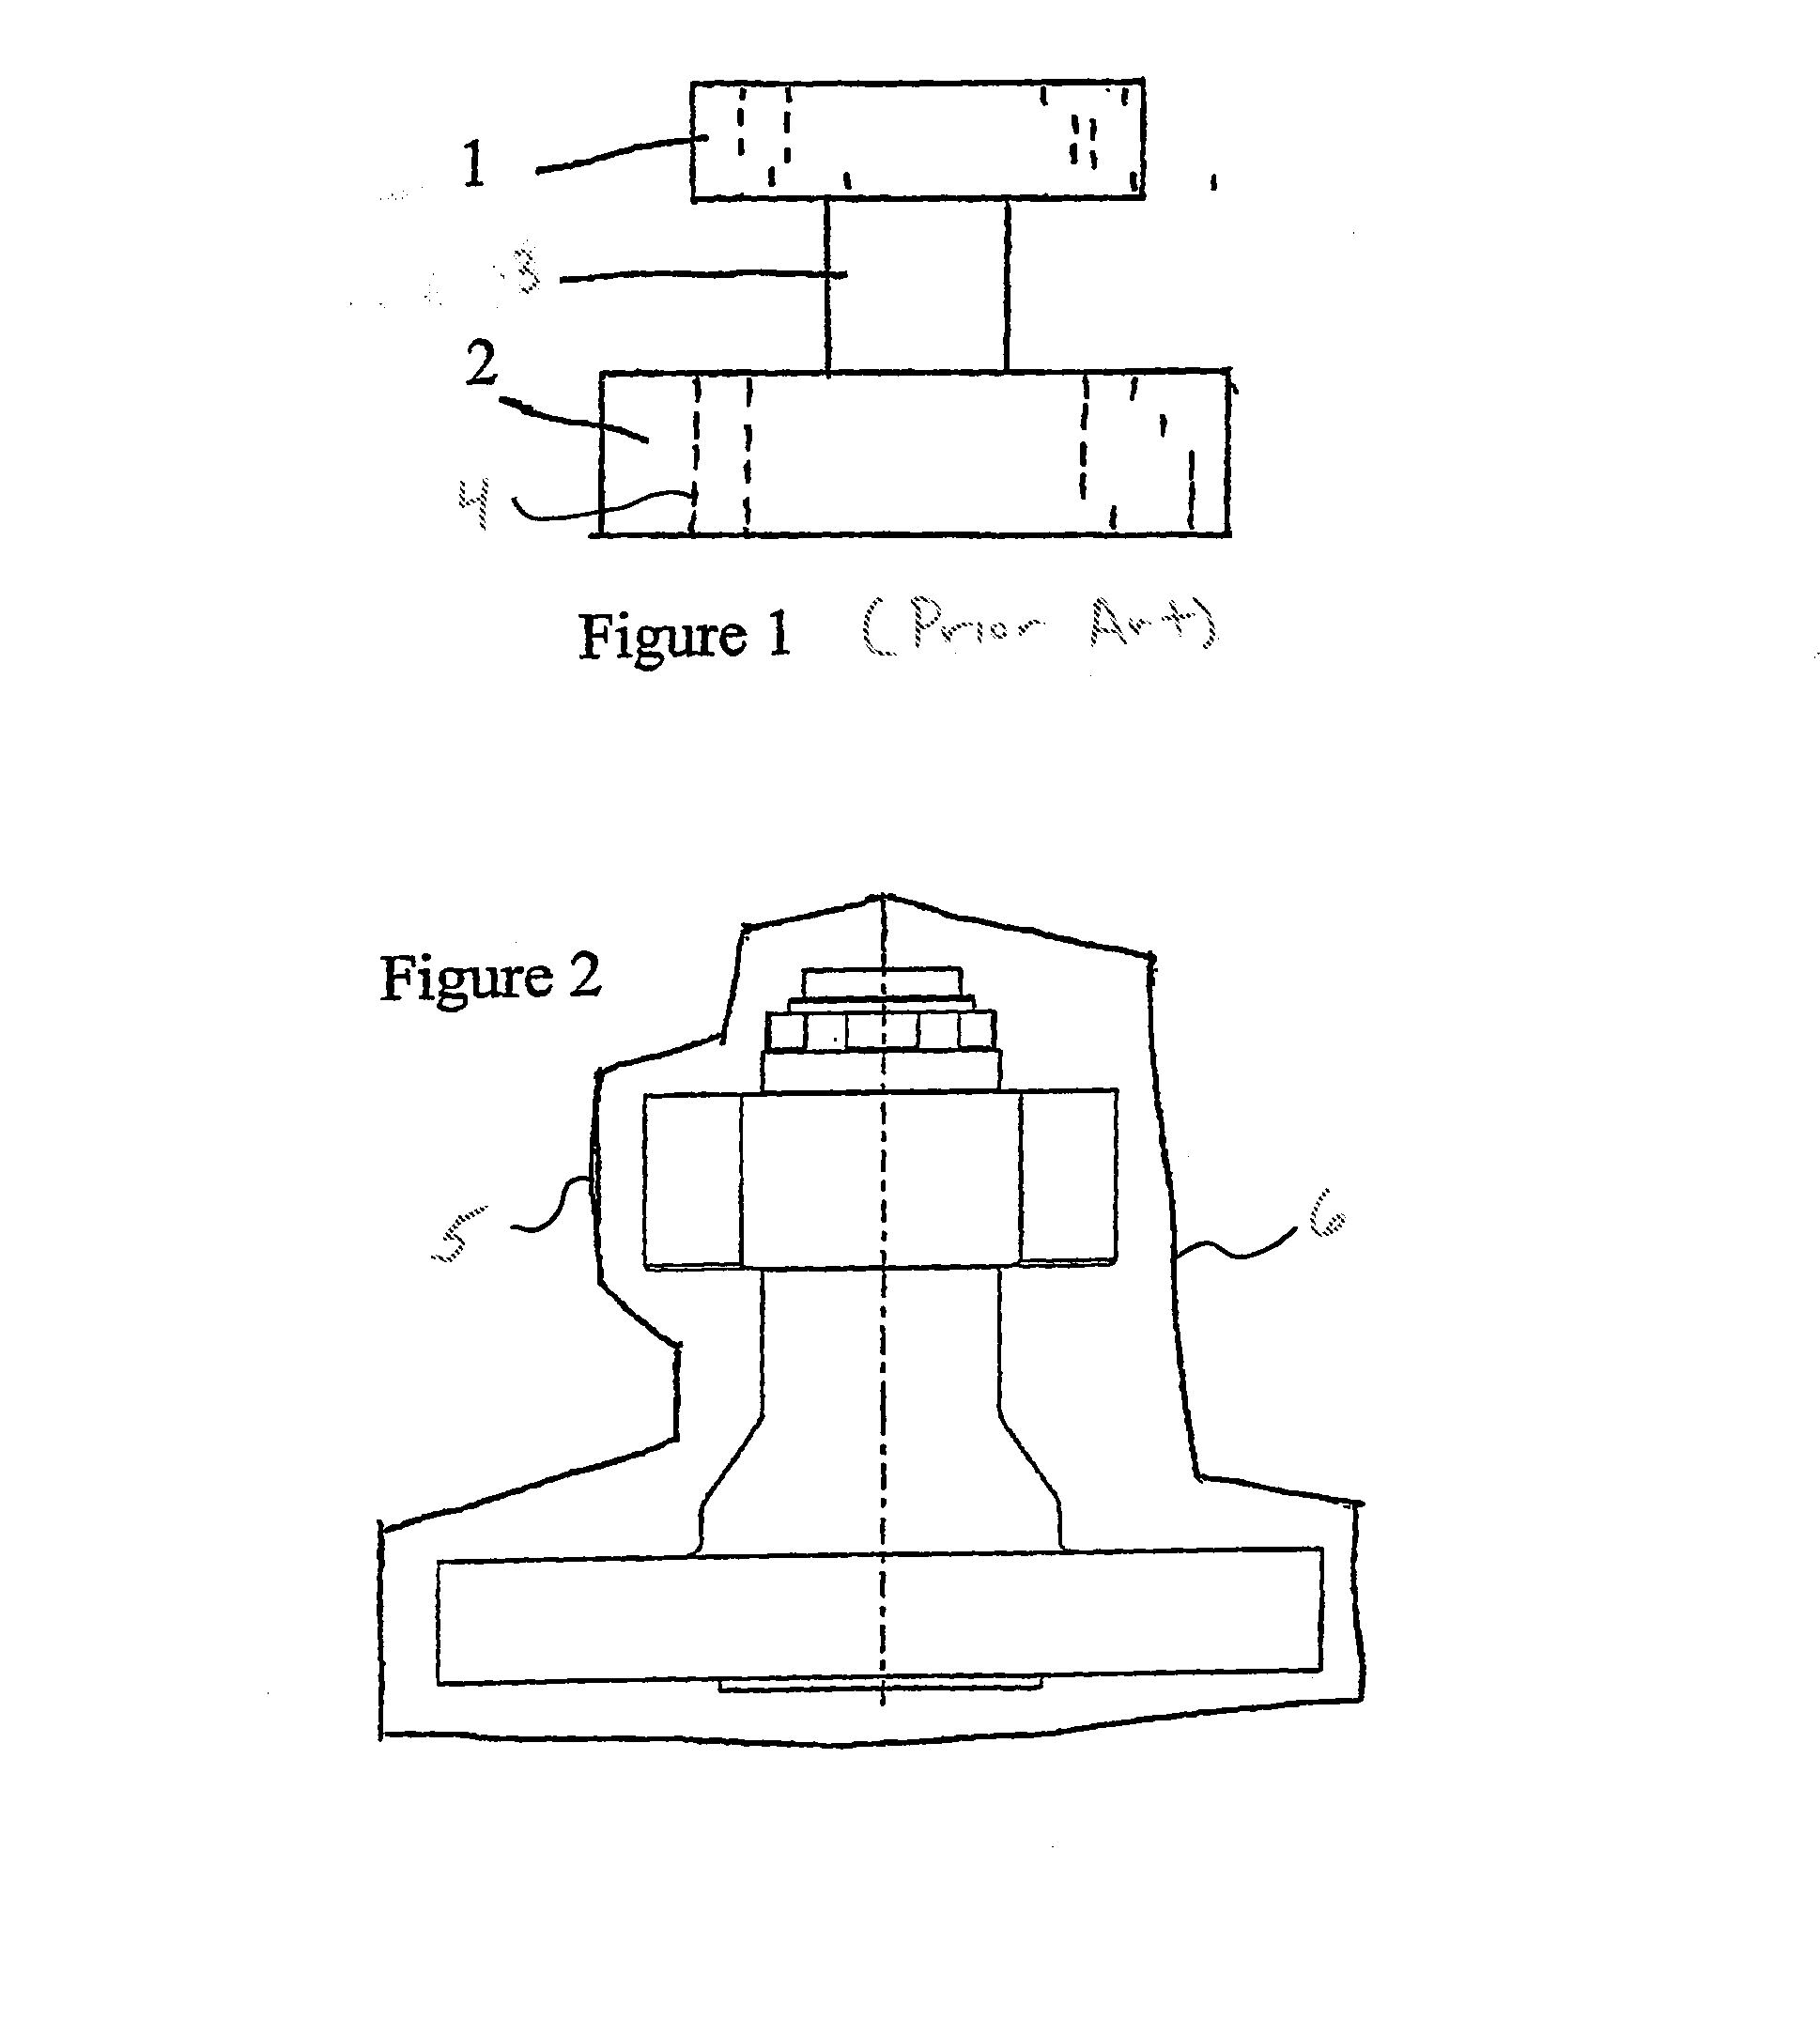 Method of providing a flanged connection